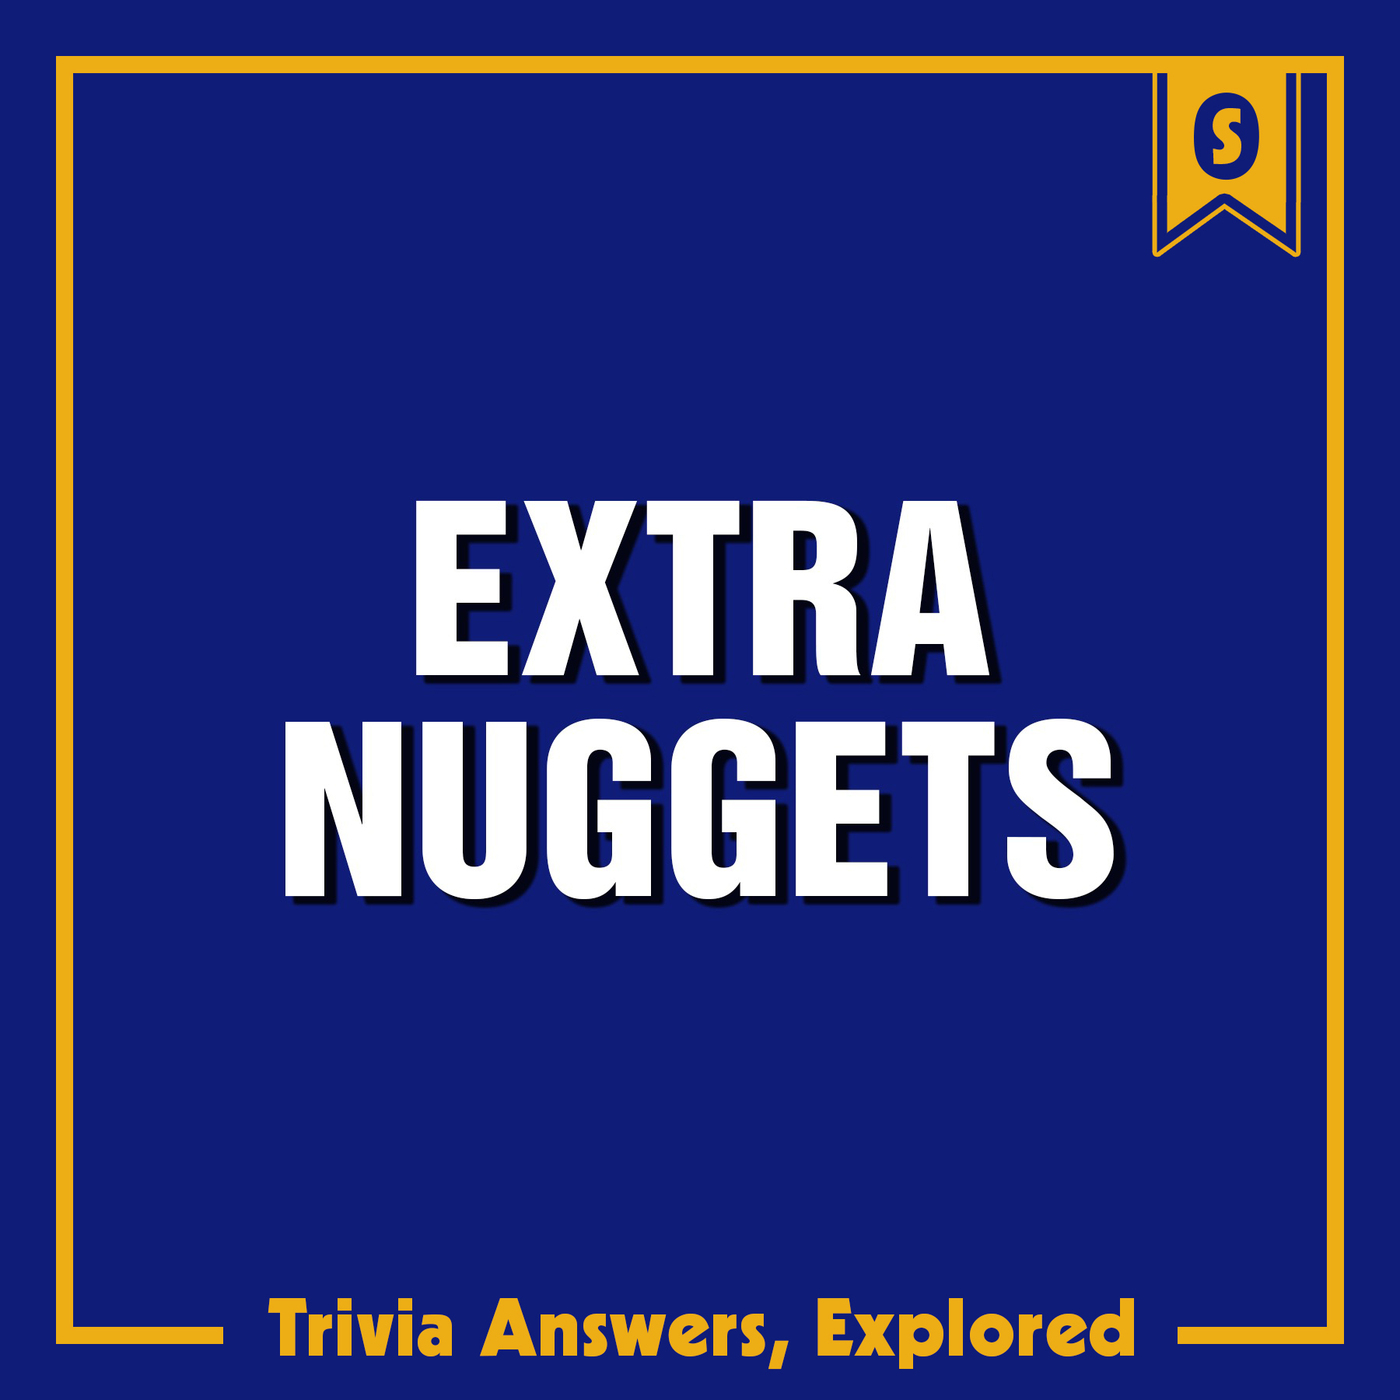 Introducing our new podcast: Extra Nuggets